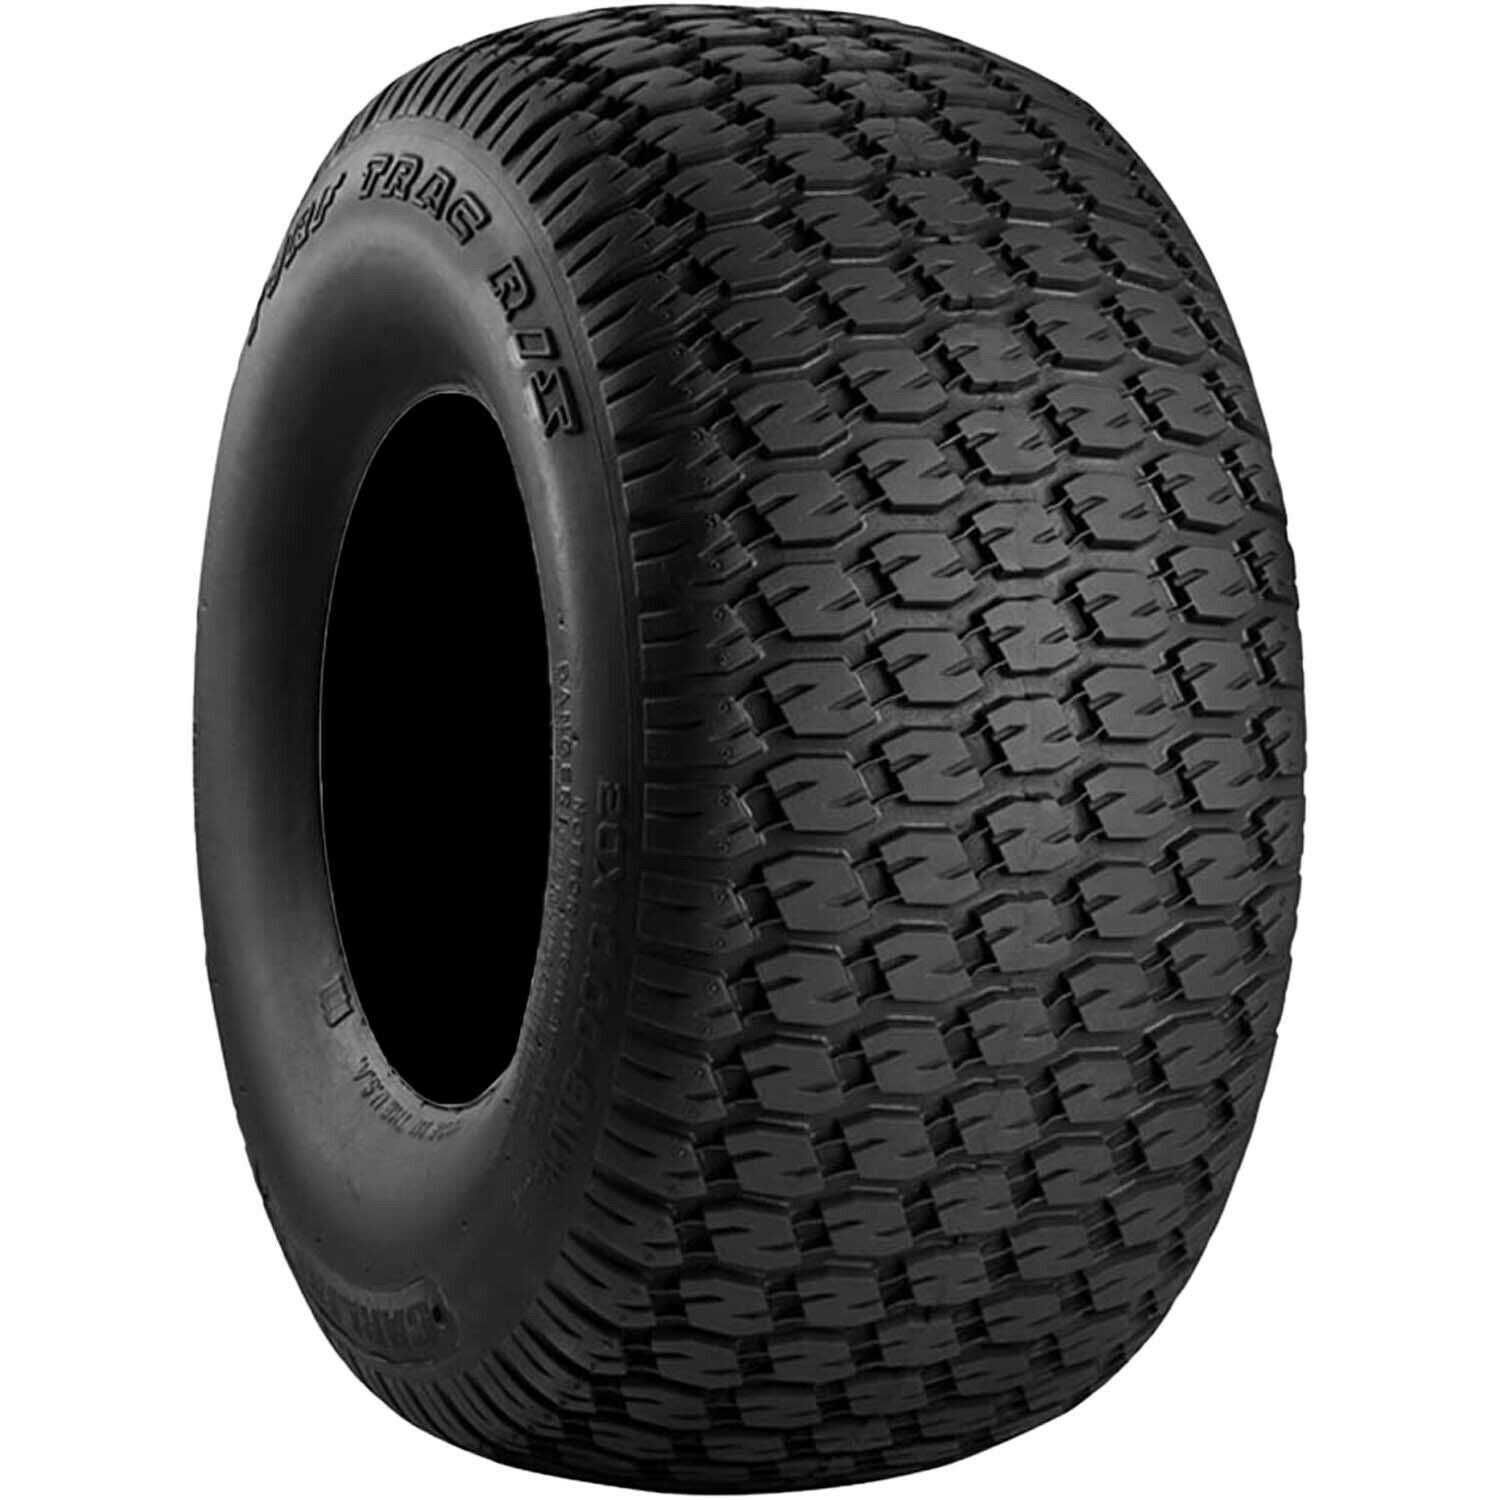 Carlisle Turf Trac R/S Lawn and Garden Tire 4Ply 22x9.50-10